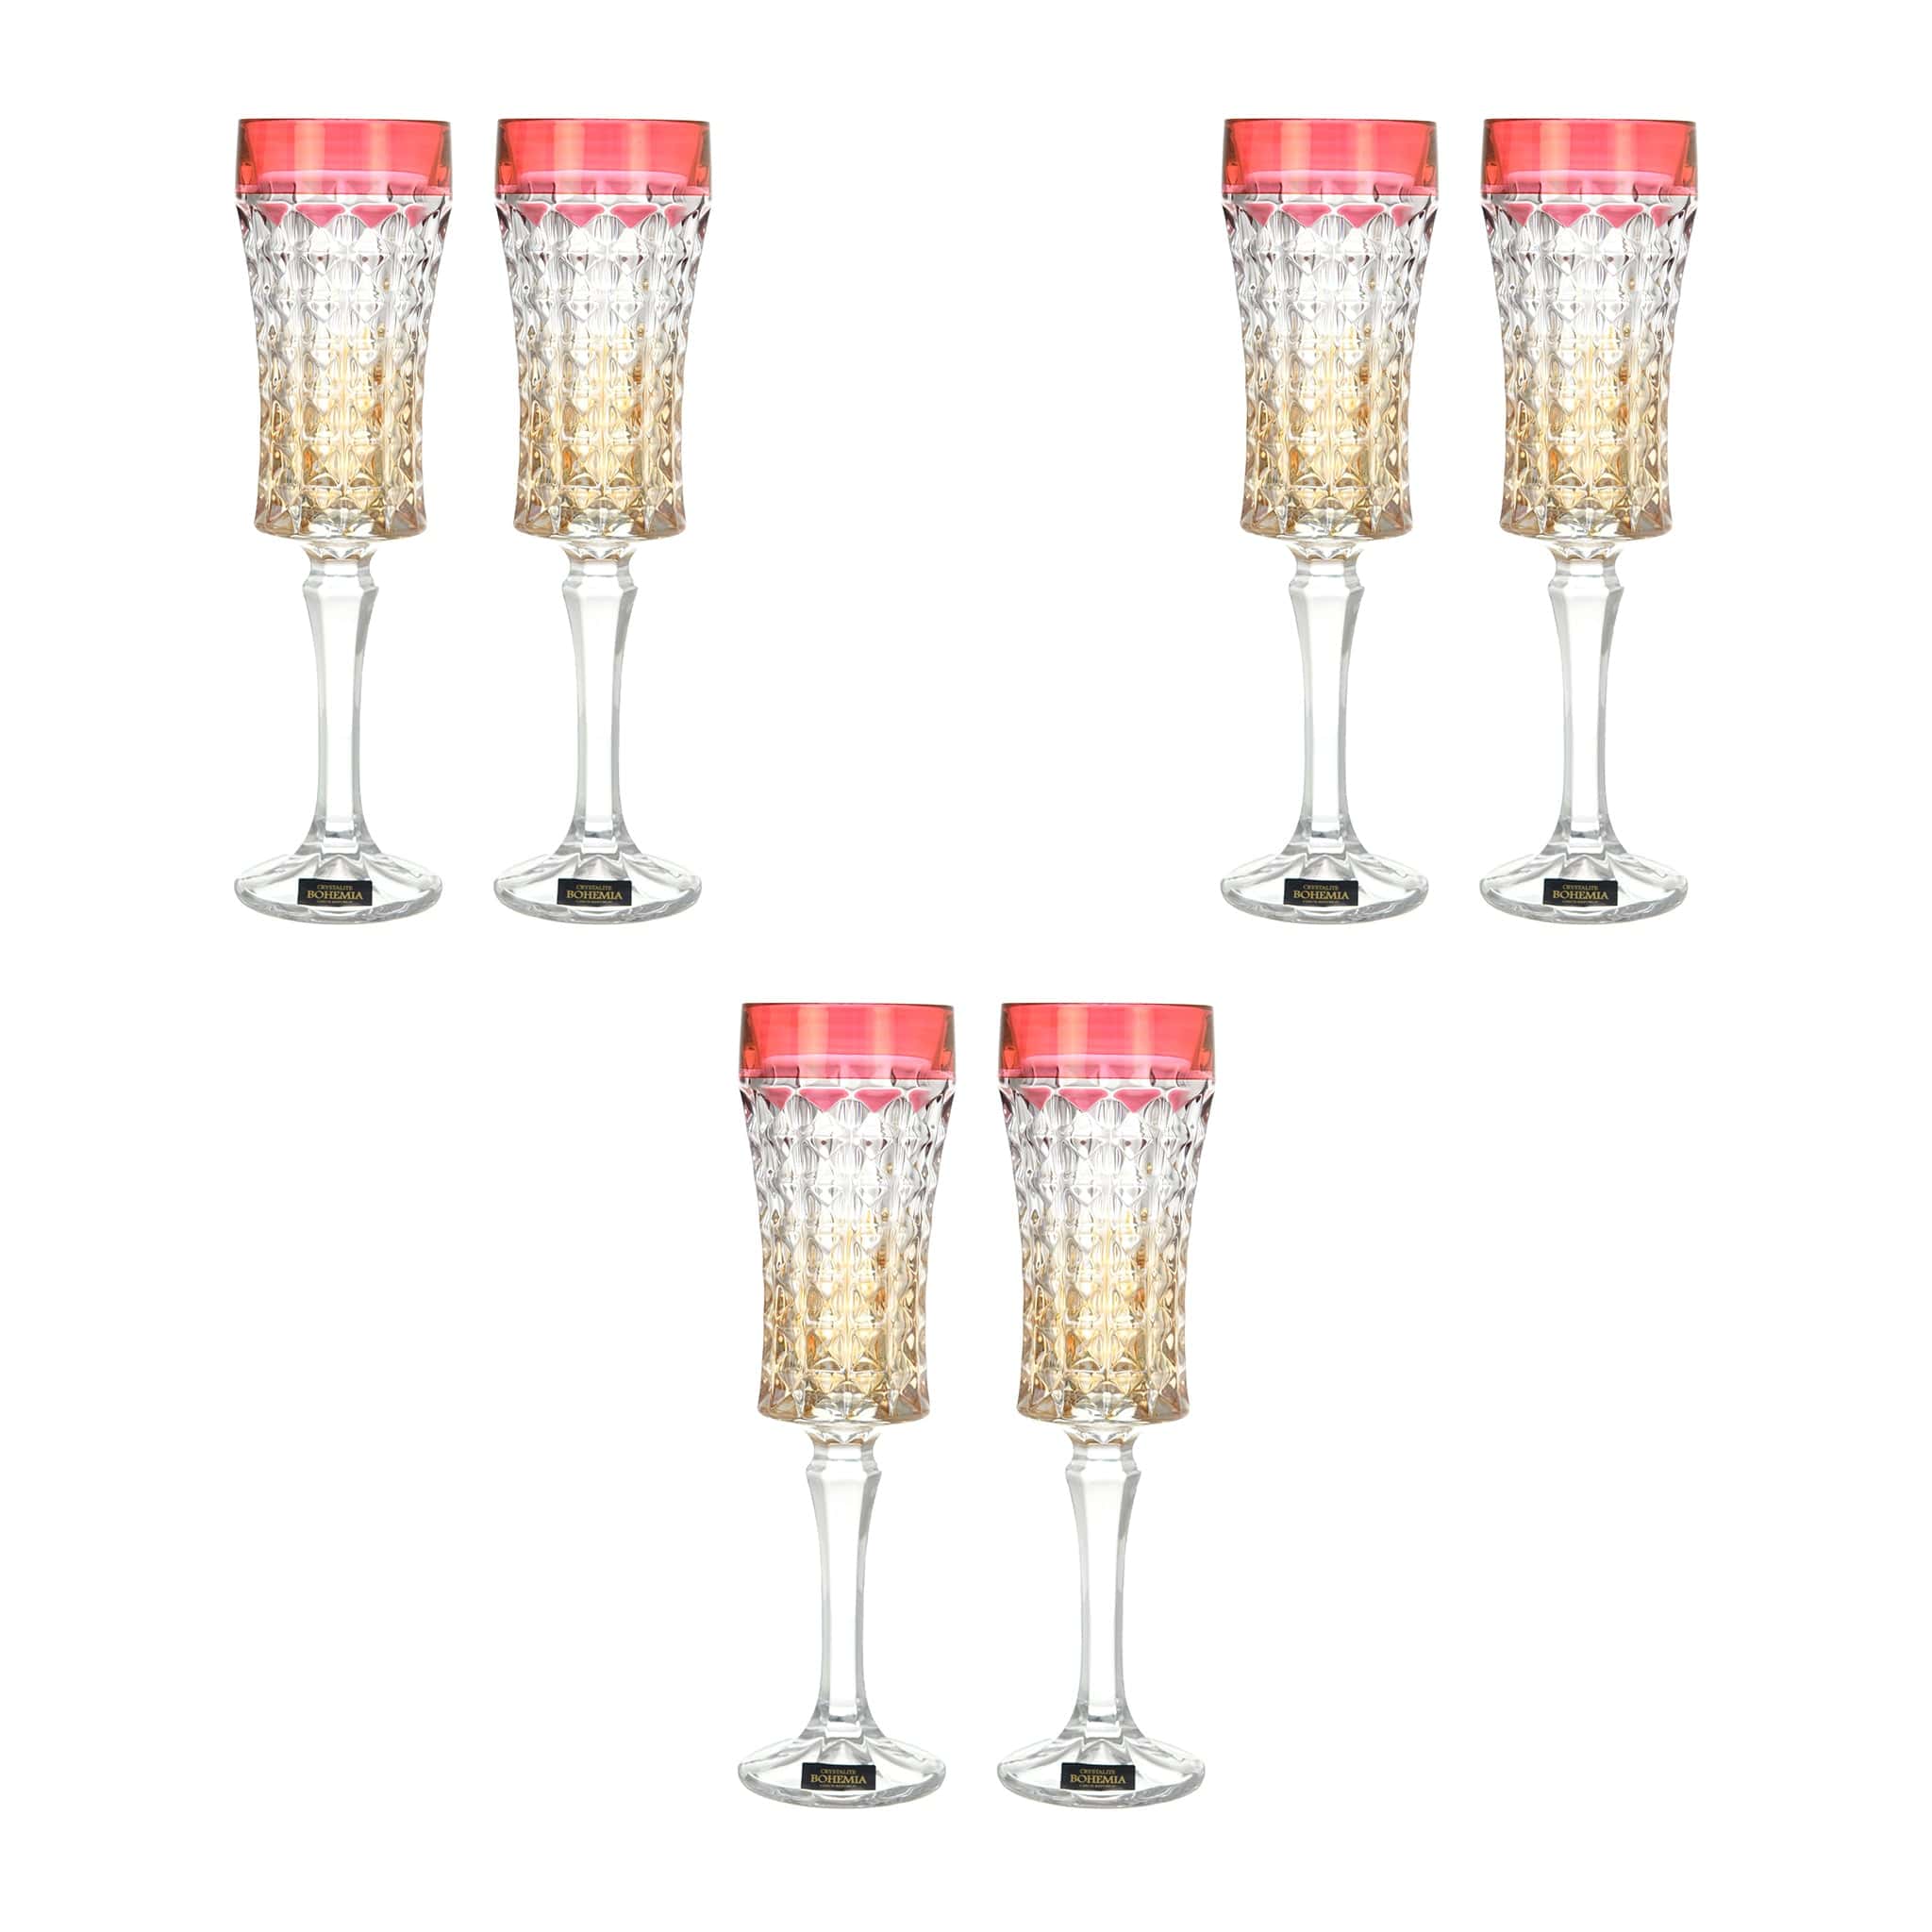 Bohemia Crystal - Flute Glass Set 6 Pieces - Gold & Red - 120ml - 2700010448